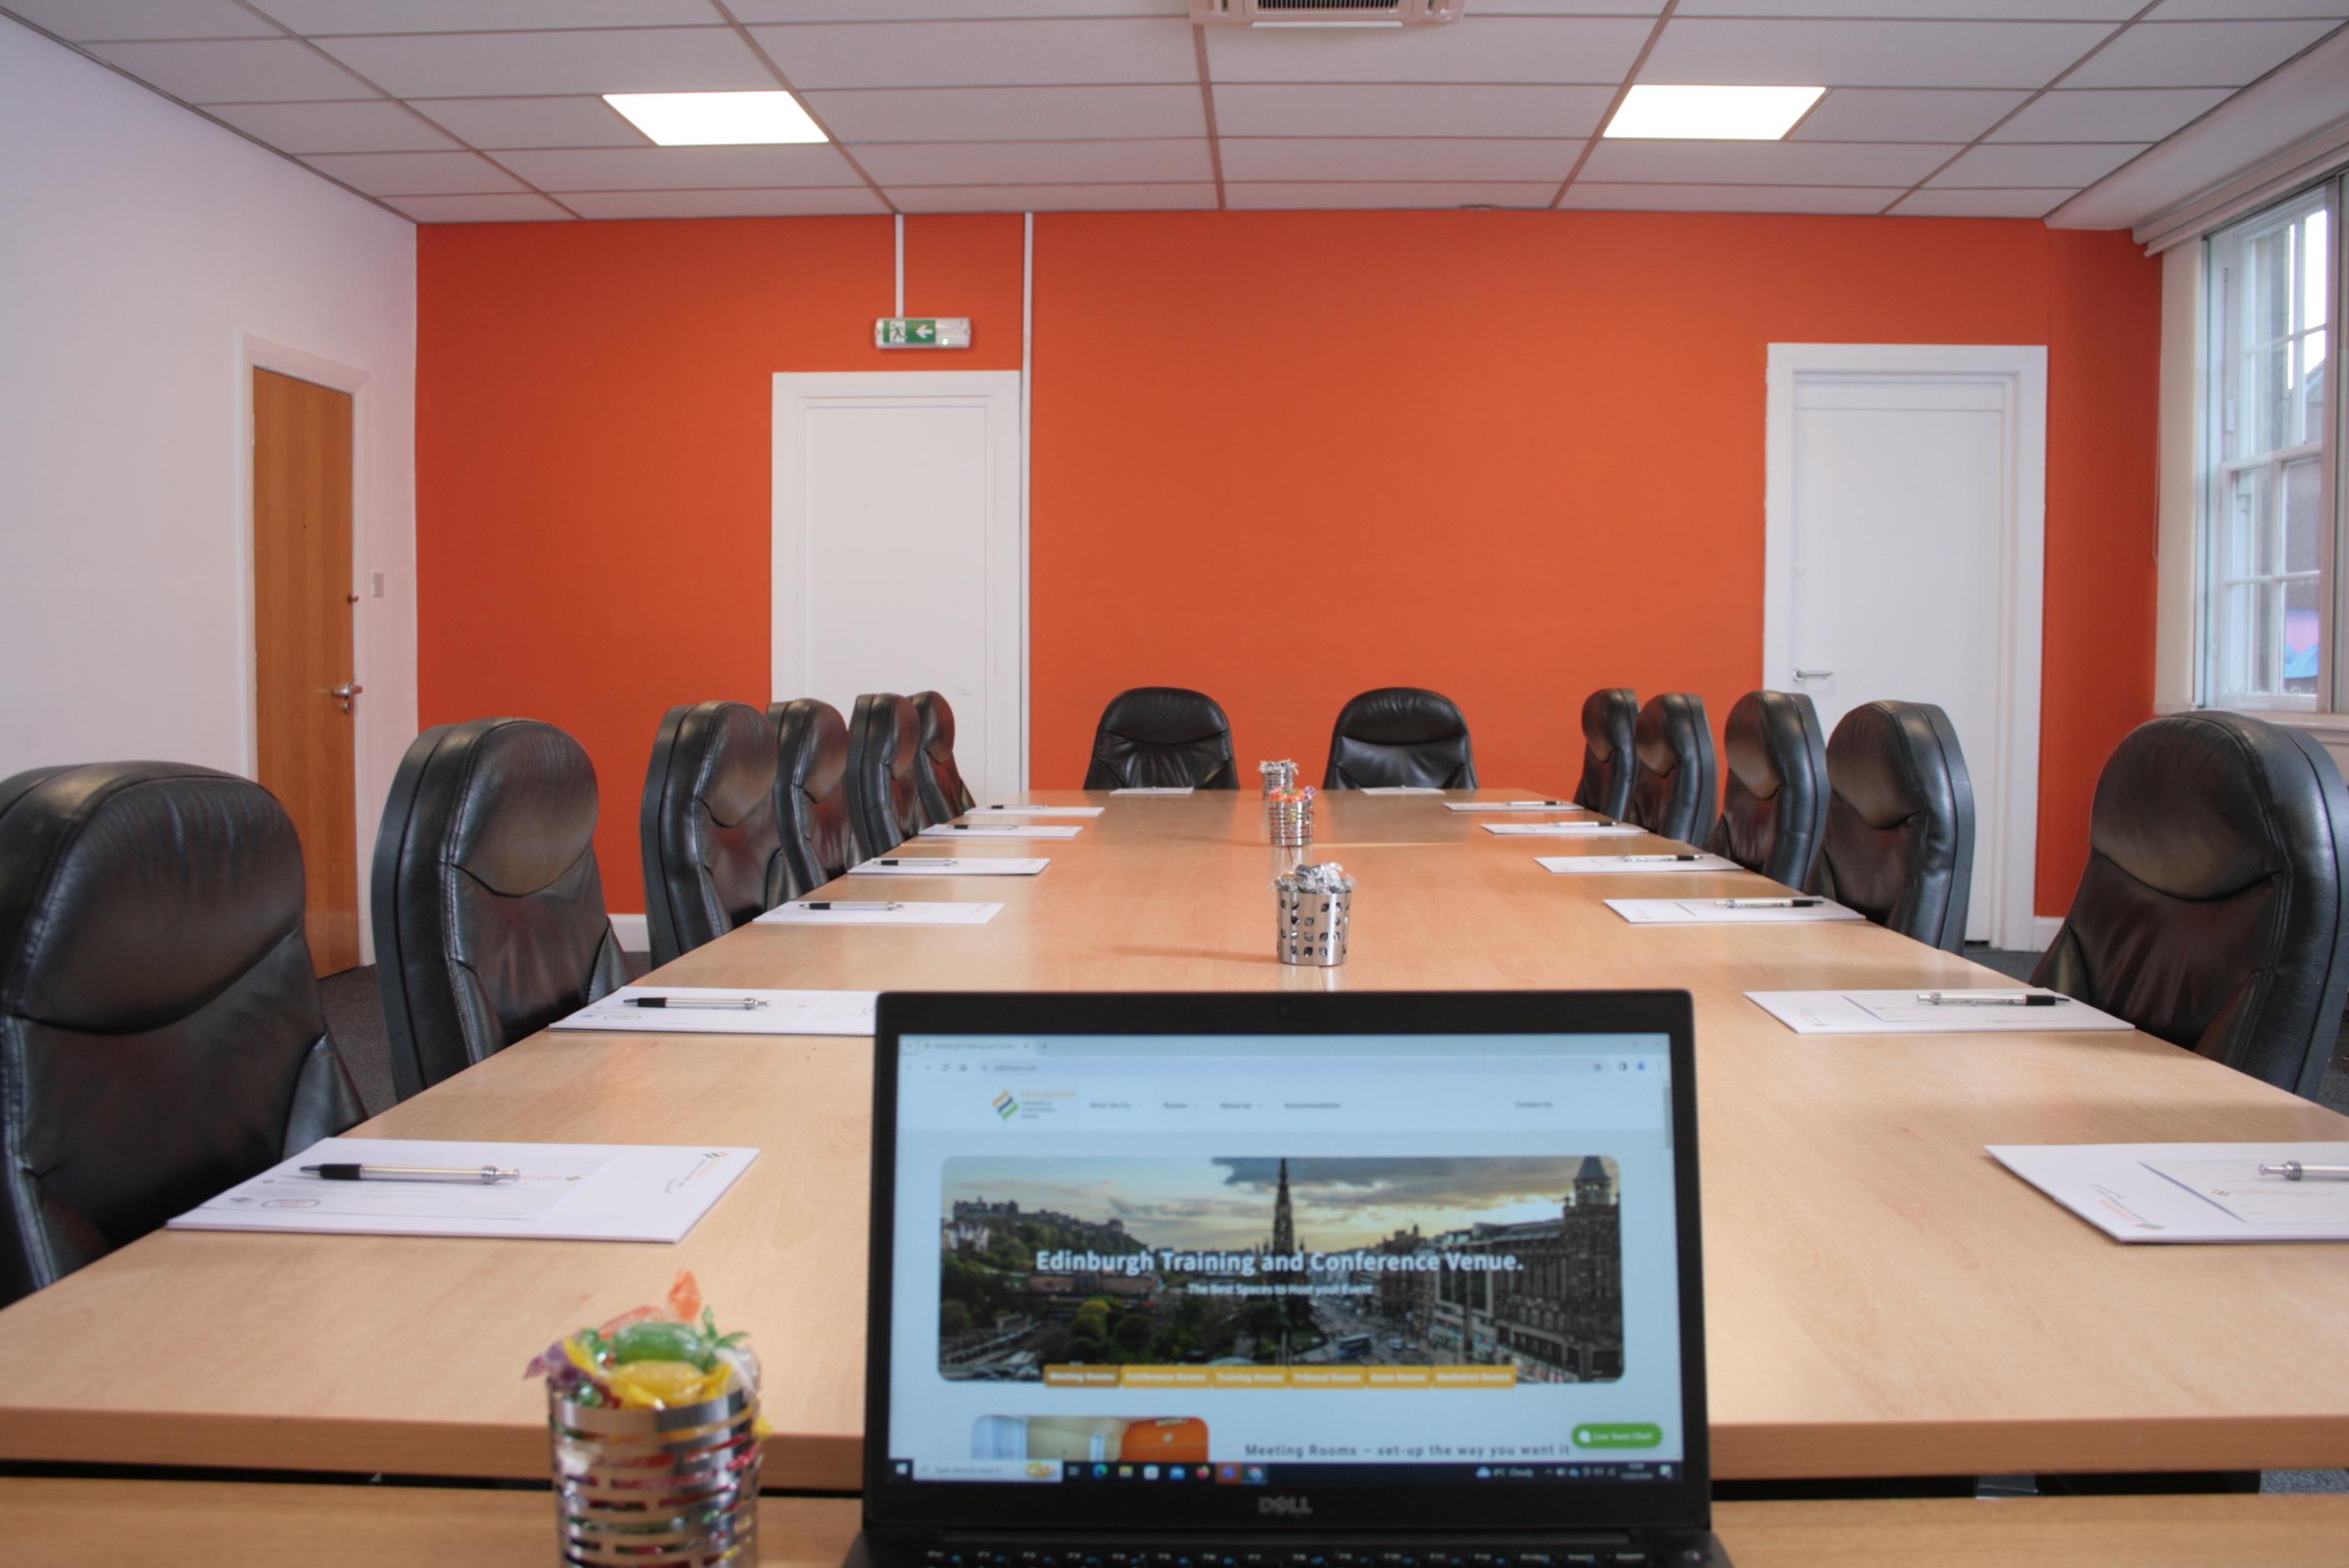 Edinburgh Training And Conference Venue, Flexible Meeting Rooms photo #1